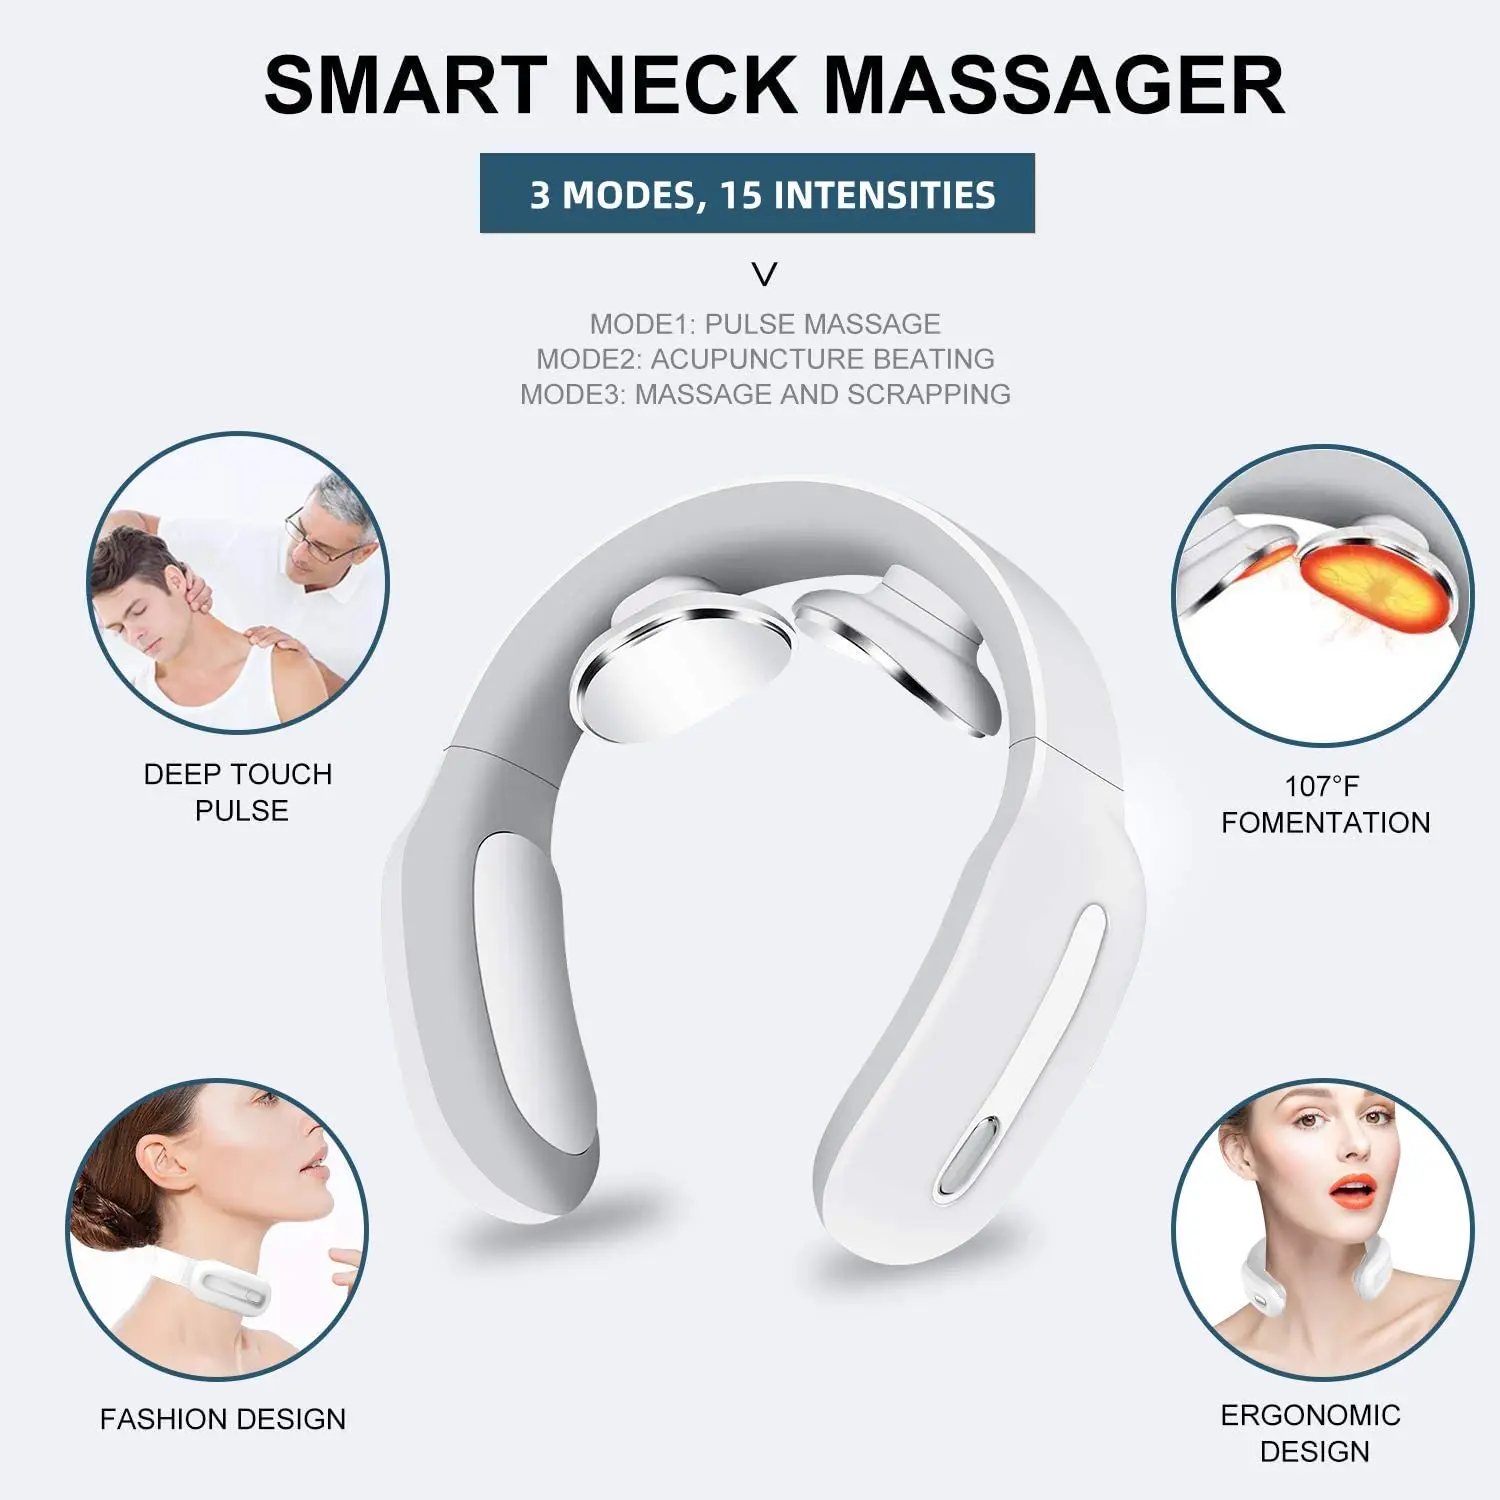 https://ae01.alicdn.com/kf/H577def1549024c568cb6225f9f301a322/Neck-Massager-with-Heat-Wandwoo-Portable-Cordless-Neck-Massage-Equipment-with-3-Modes-and-15-Speeds.jpg